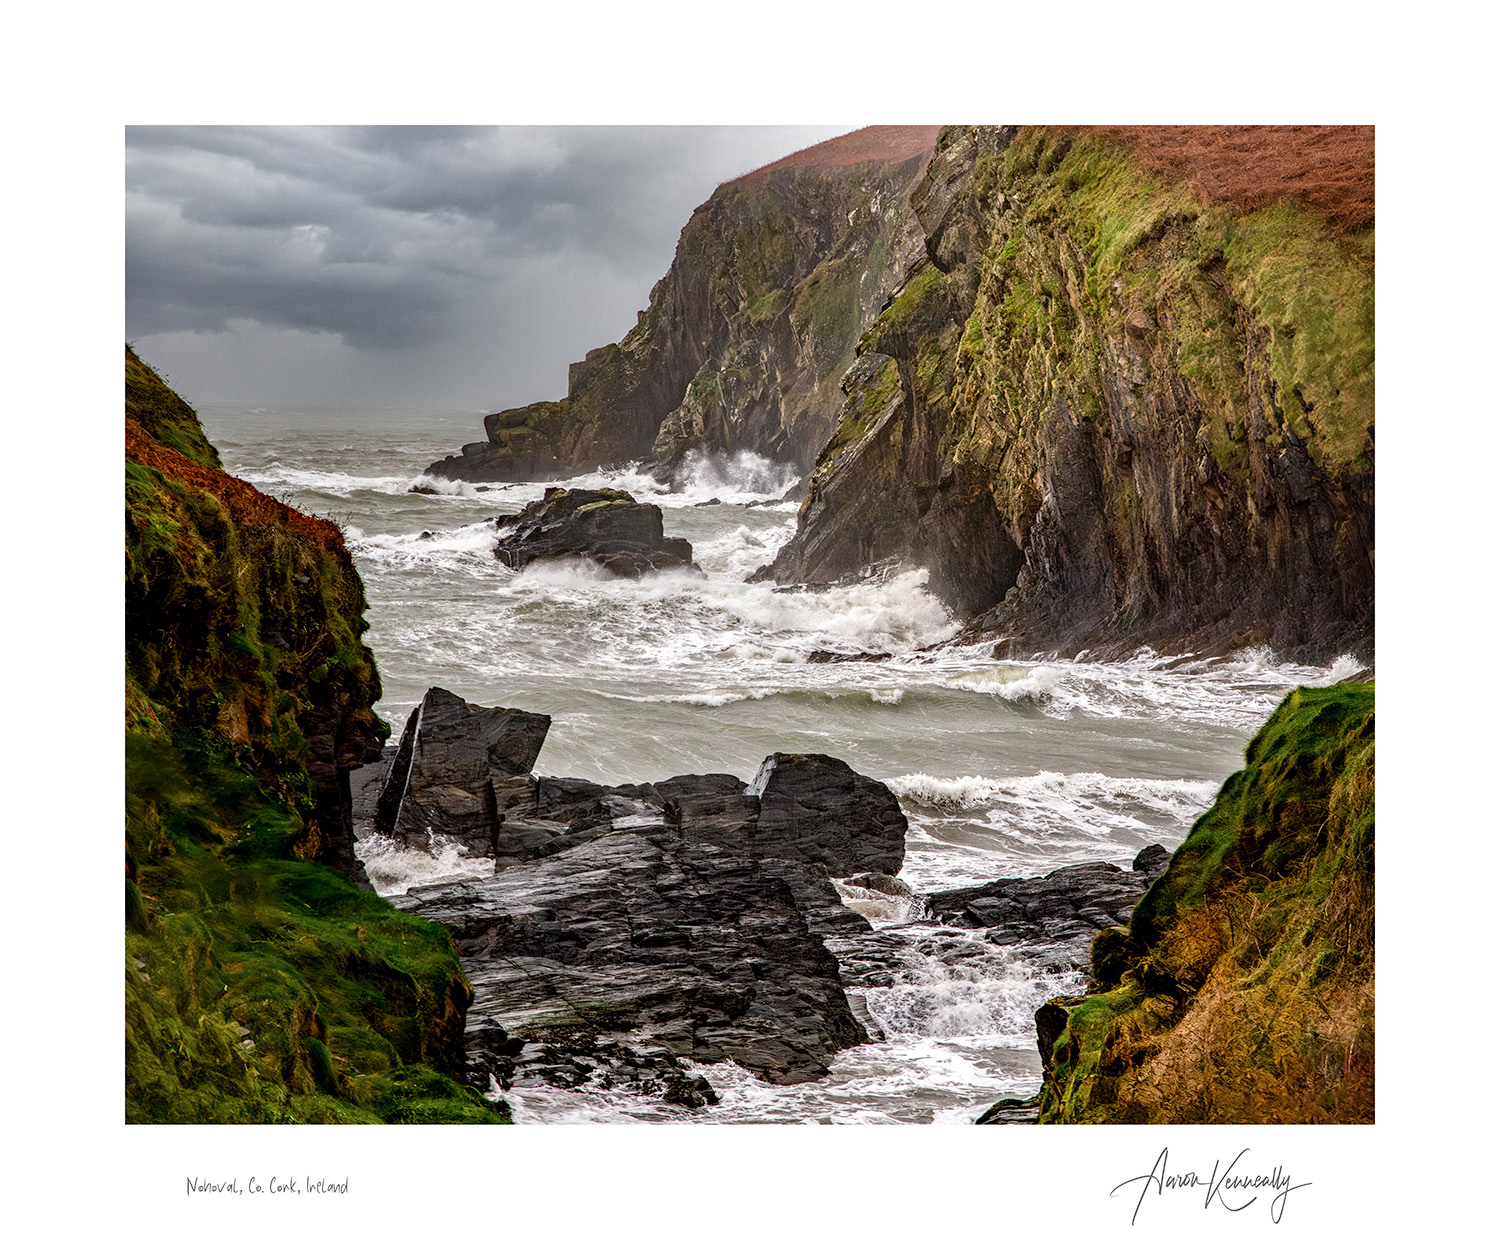 Nohoval Cove, Co. Cork, Ireland